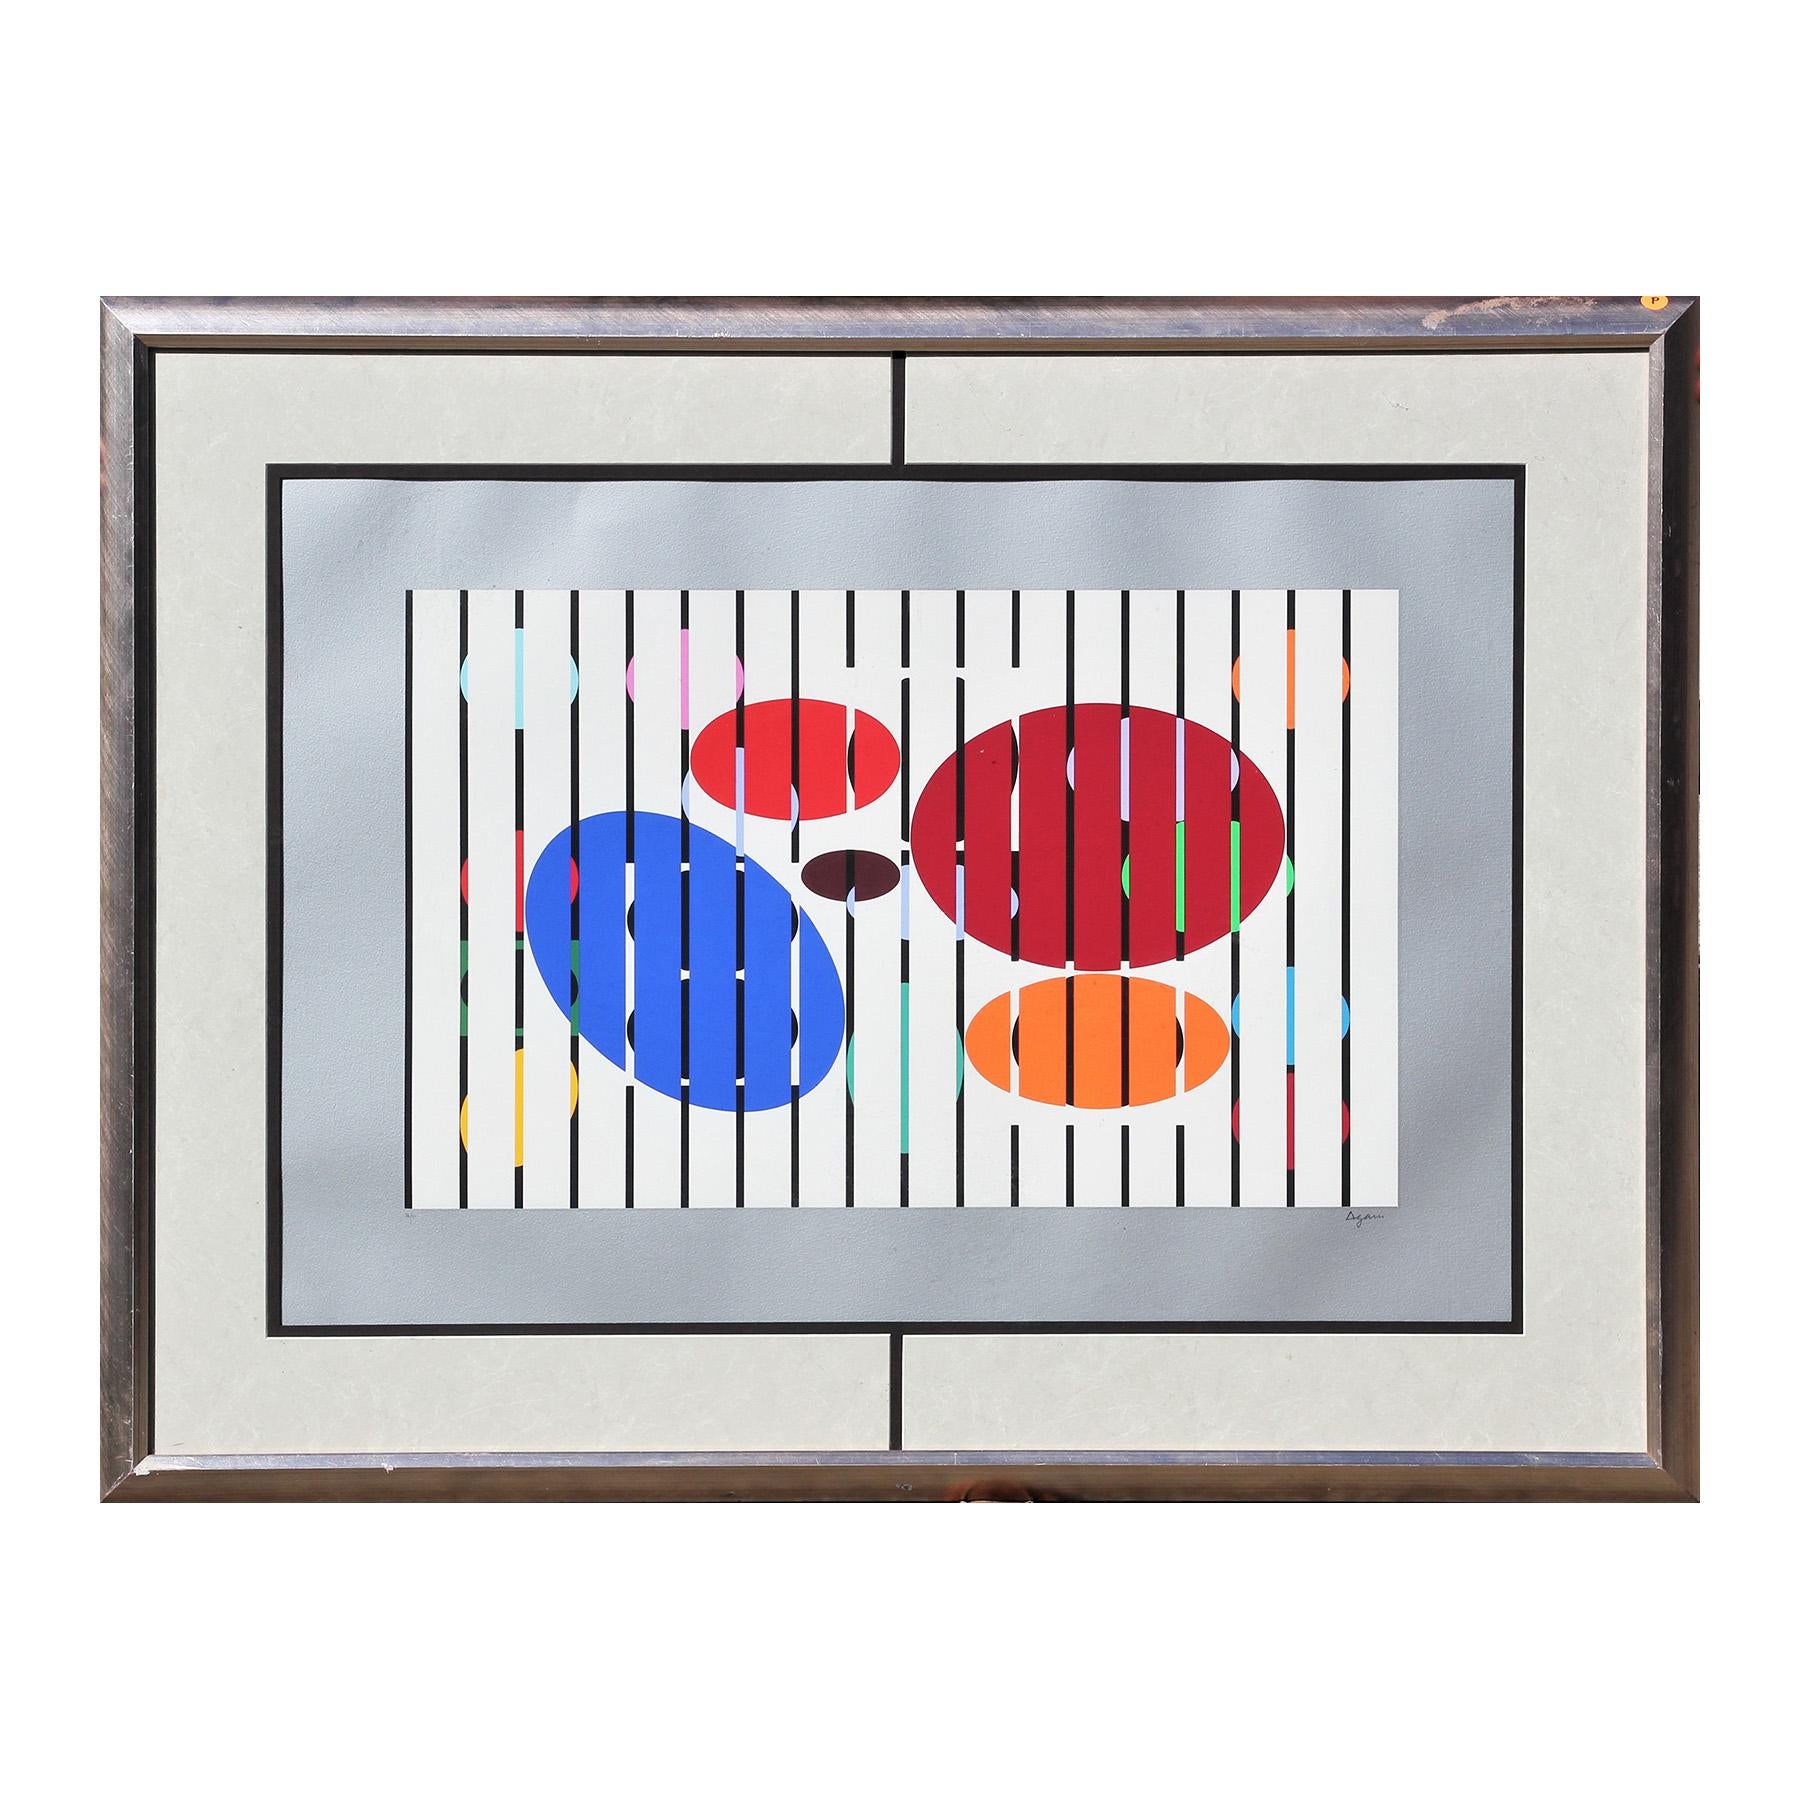 Large Orange, Blue, and Red Abstract Geometric Lithograph Edition 84 of 90 - Print by Yaacov Agam